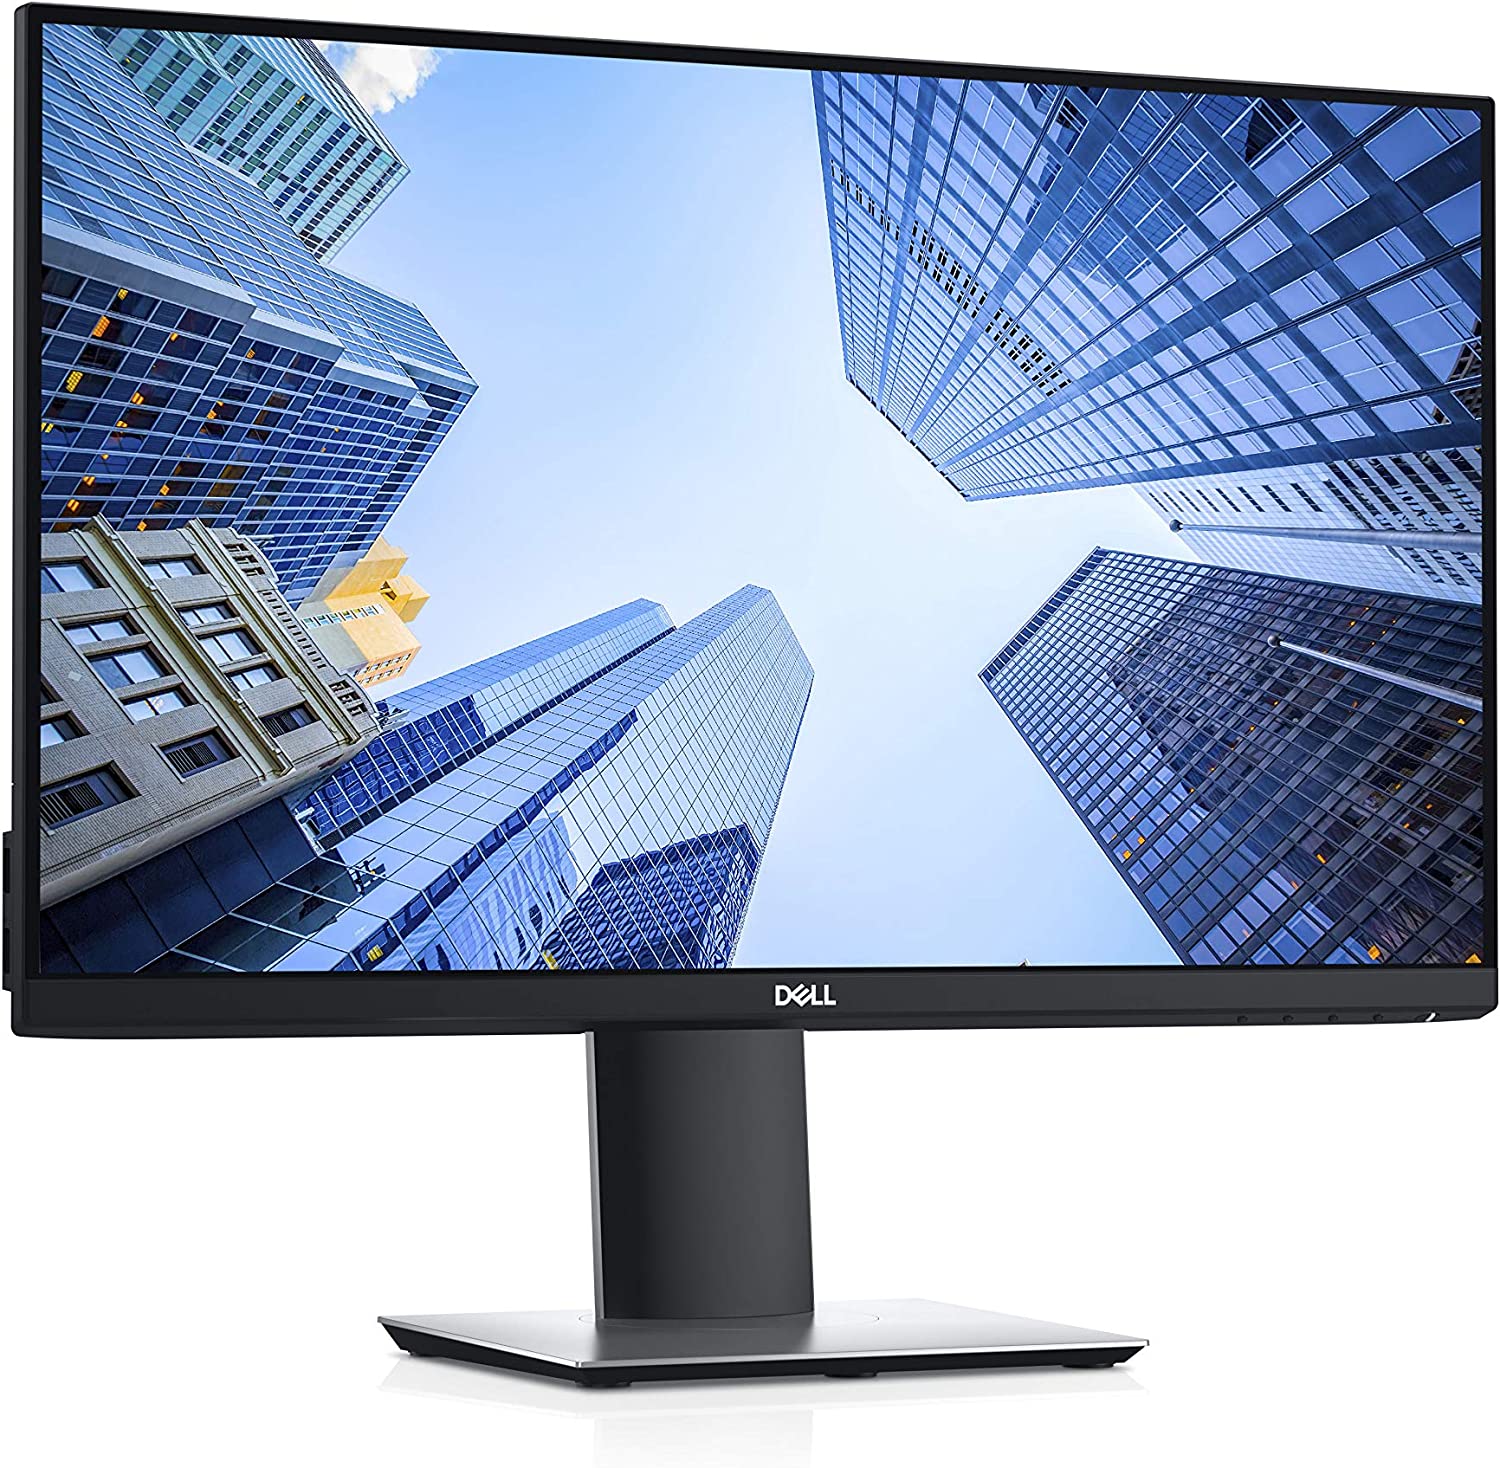 Dell P2419H 24 Inch LED-Backlit, Anti-Glare, 3H Hard Coating IPS Monitor - (8 ms Response, FHD 1920 x 1080 at 60Hz, 1000:1 Contrast, with ComfortView DisplayPort, VGA, HDMI and USB), Black Single